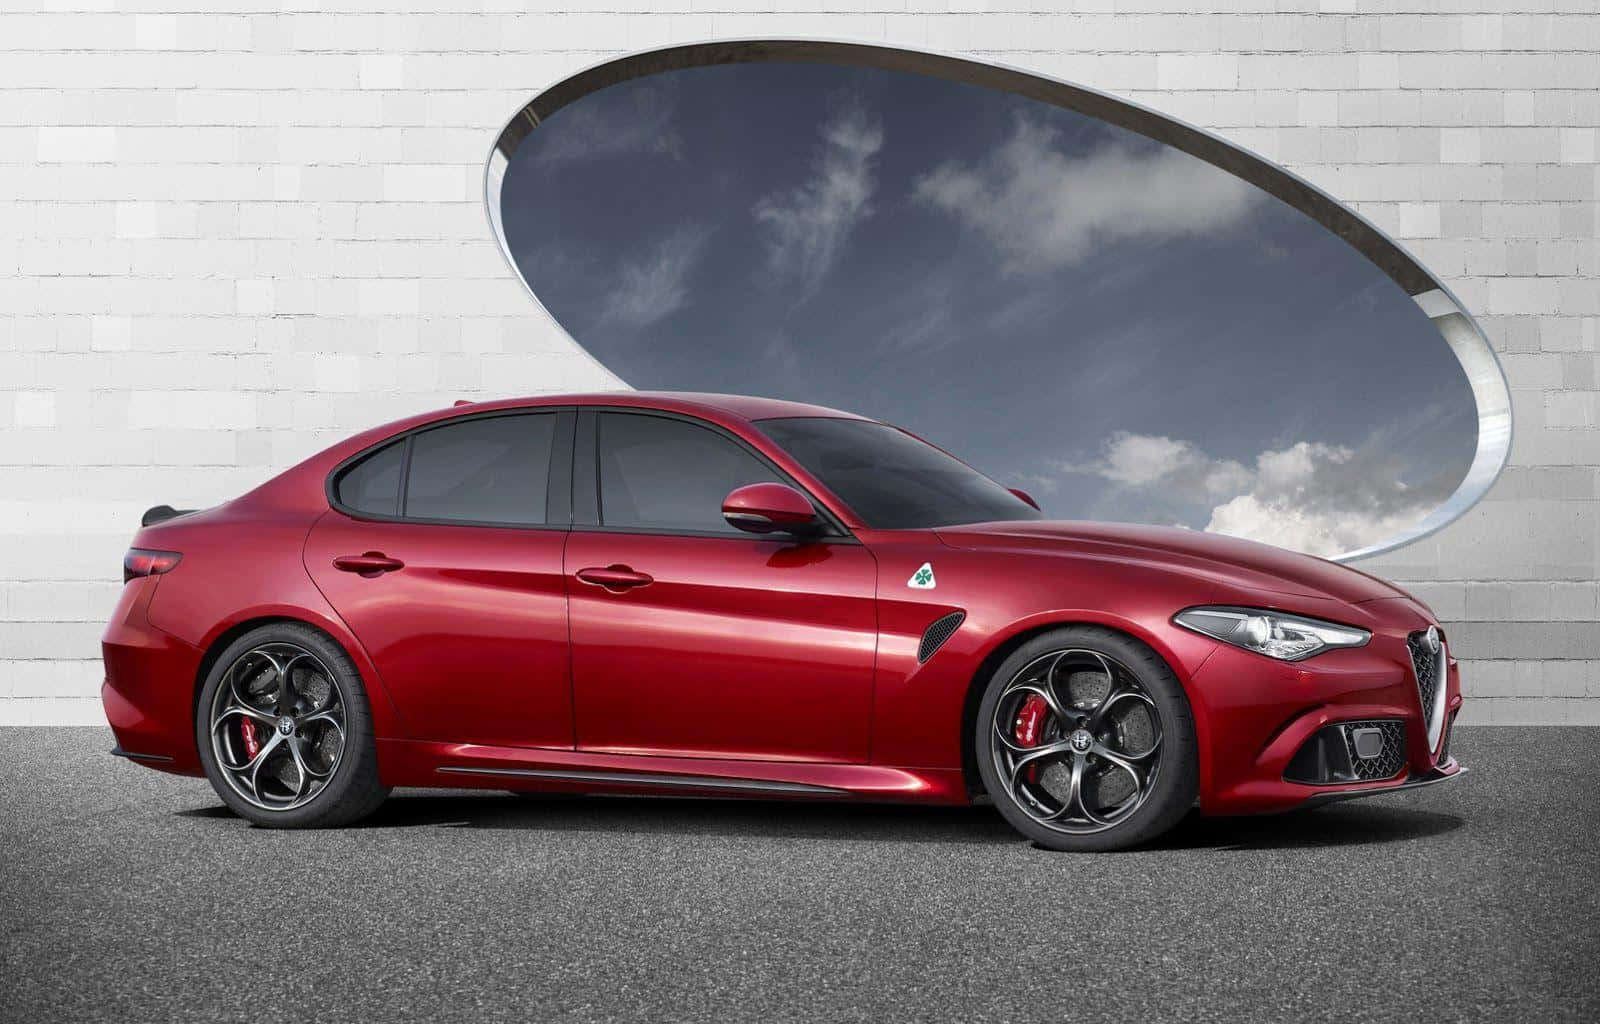 Discover the thrill of driving with the iconic Alfa Romeo